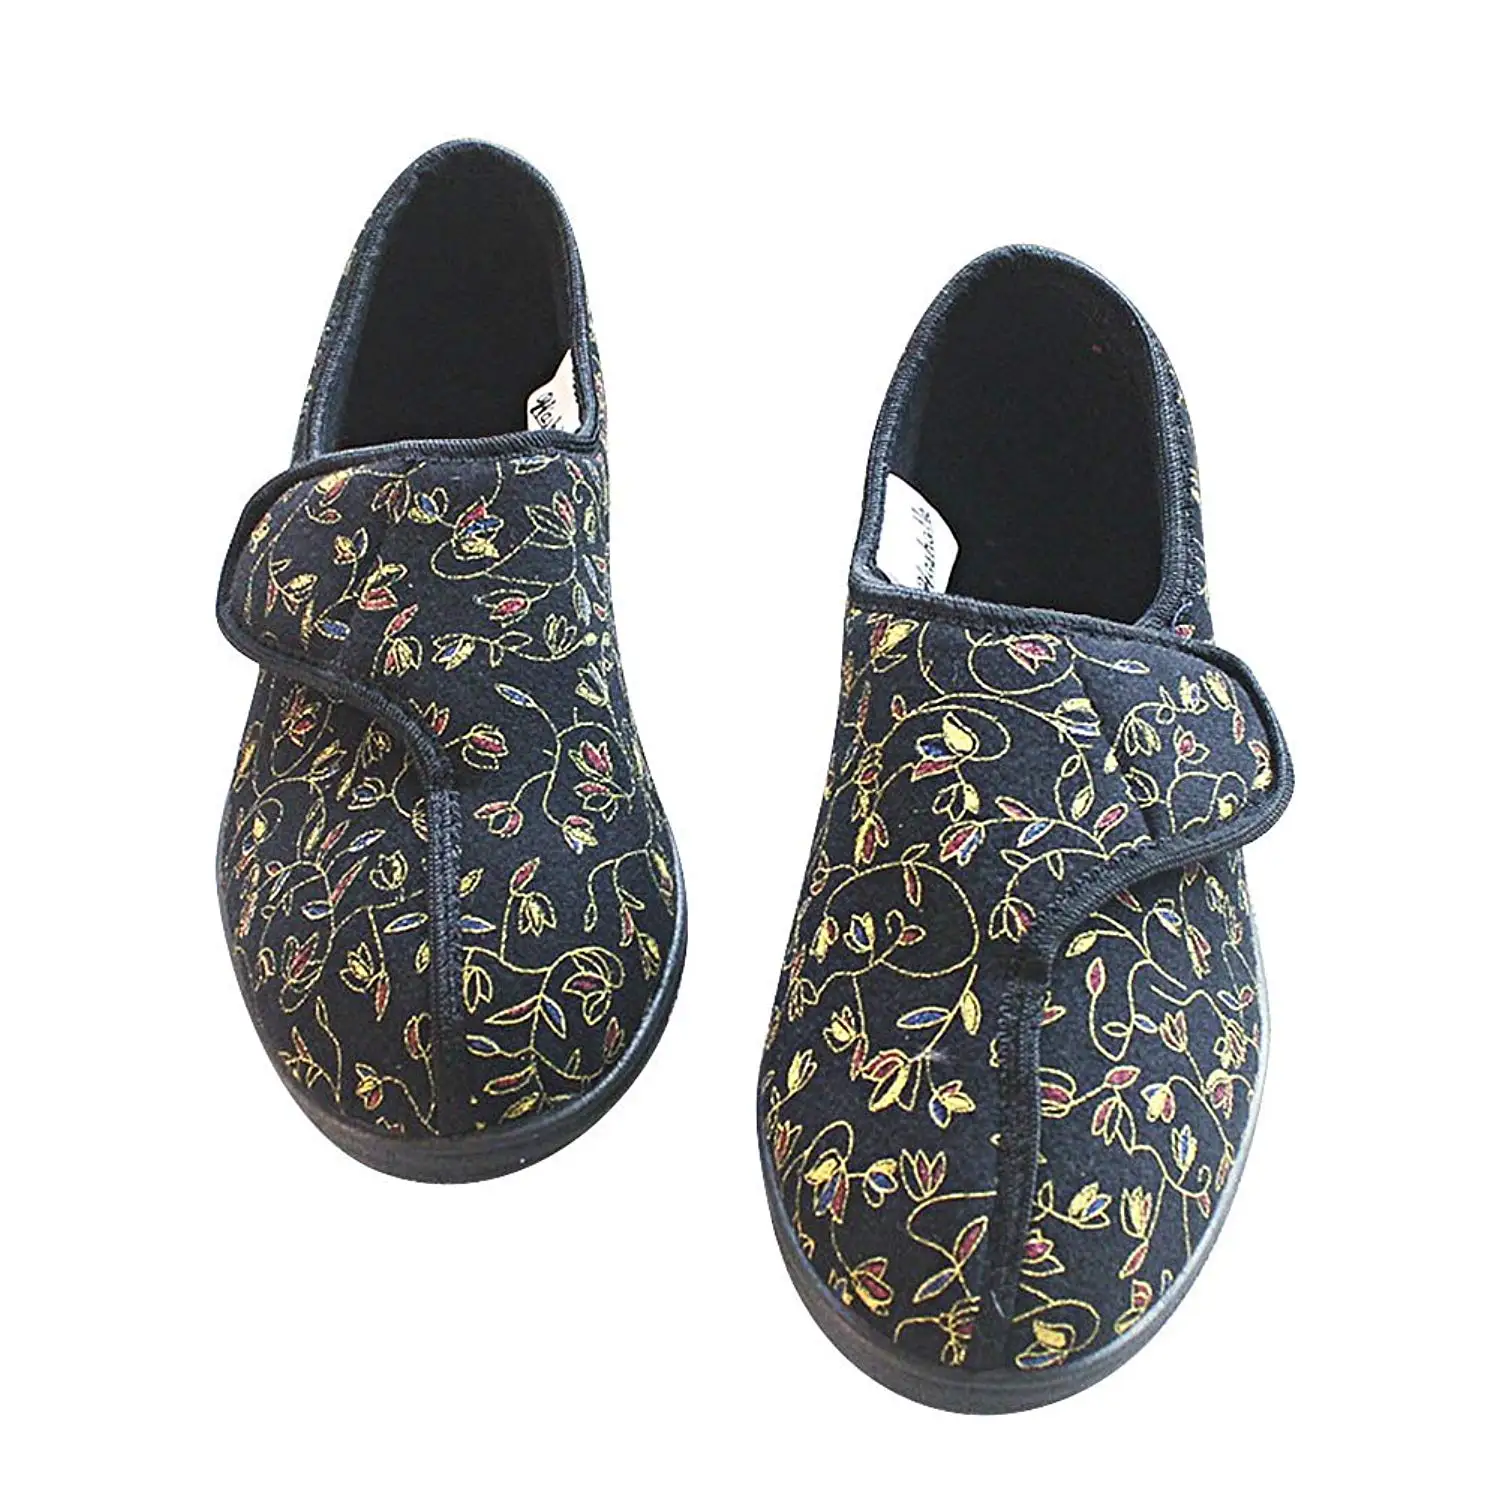 womens extra wide house slippers